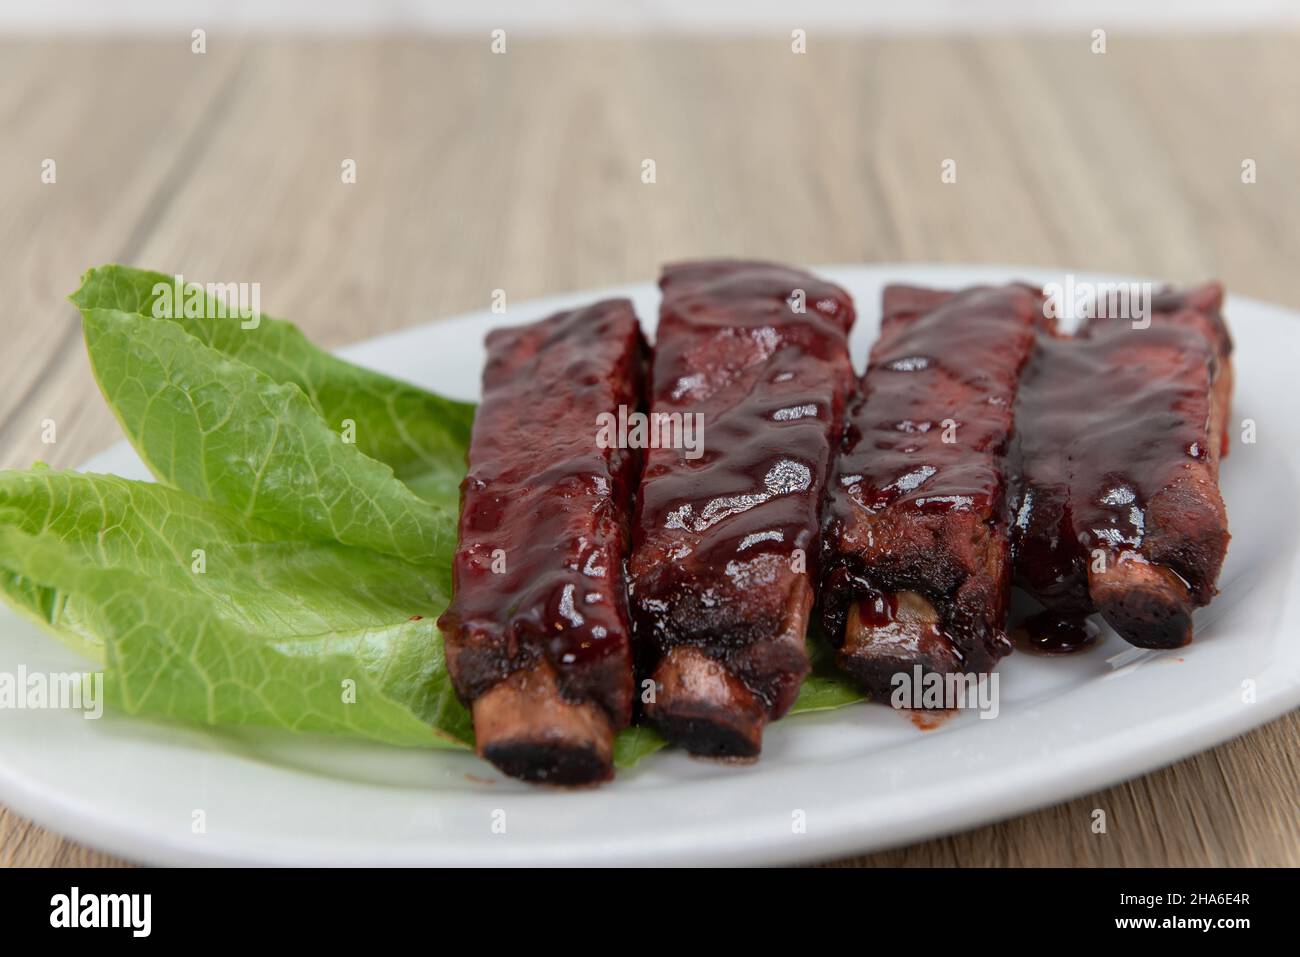 Barbecue ribs glazed with sauce and garnished with lettuce for you to eat. Stock Photo